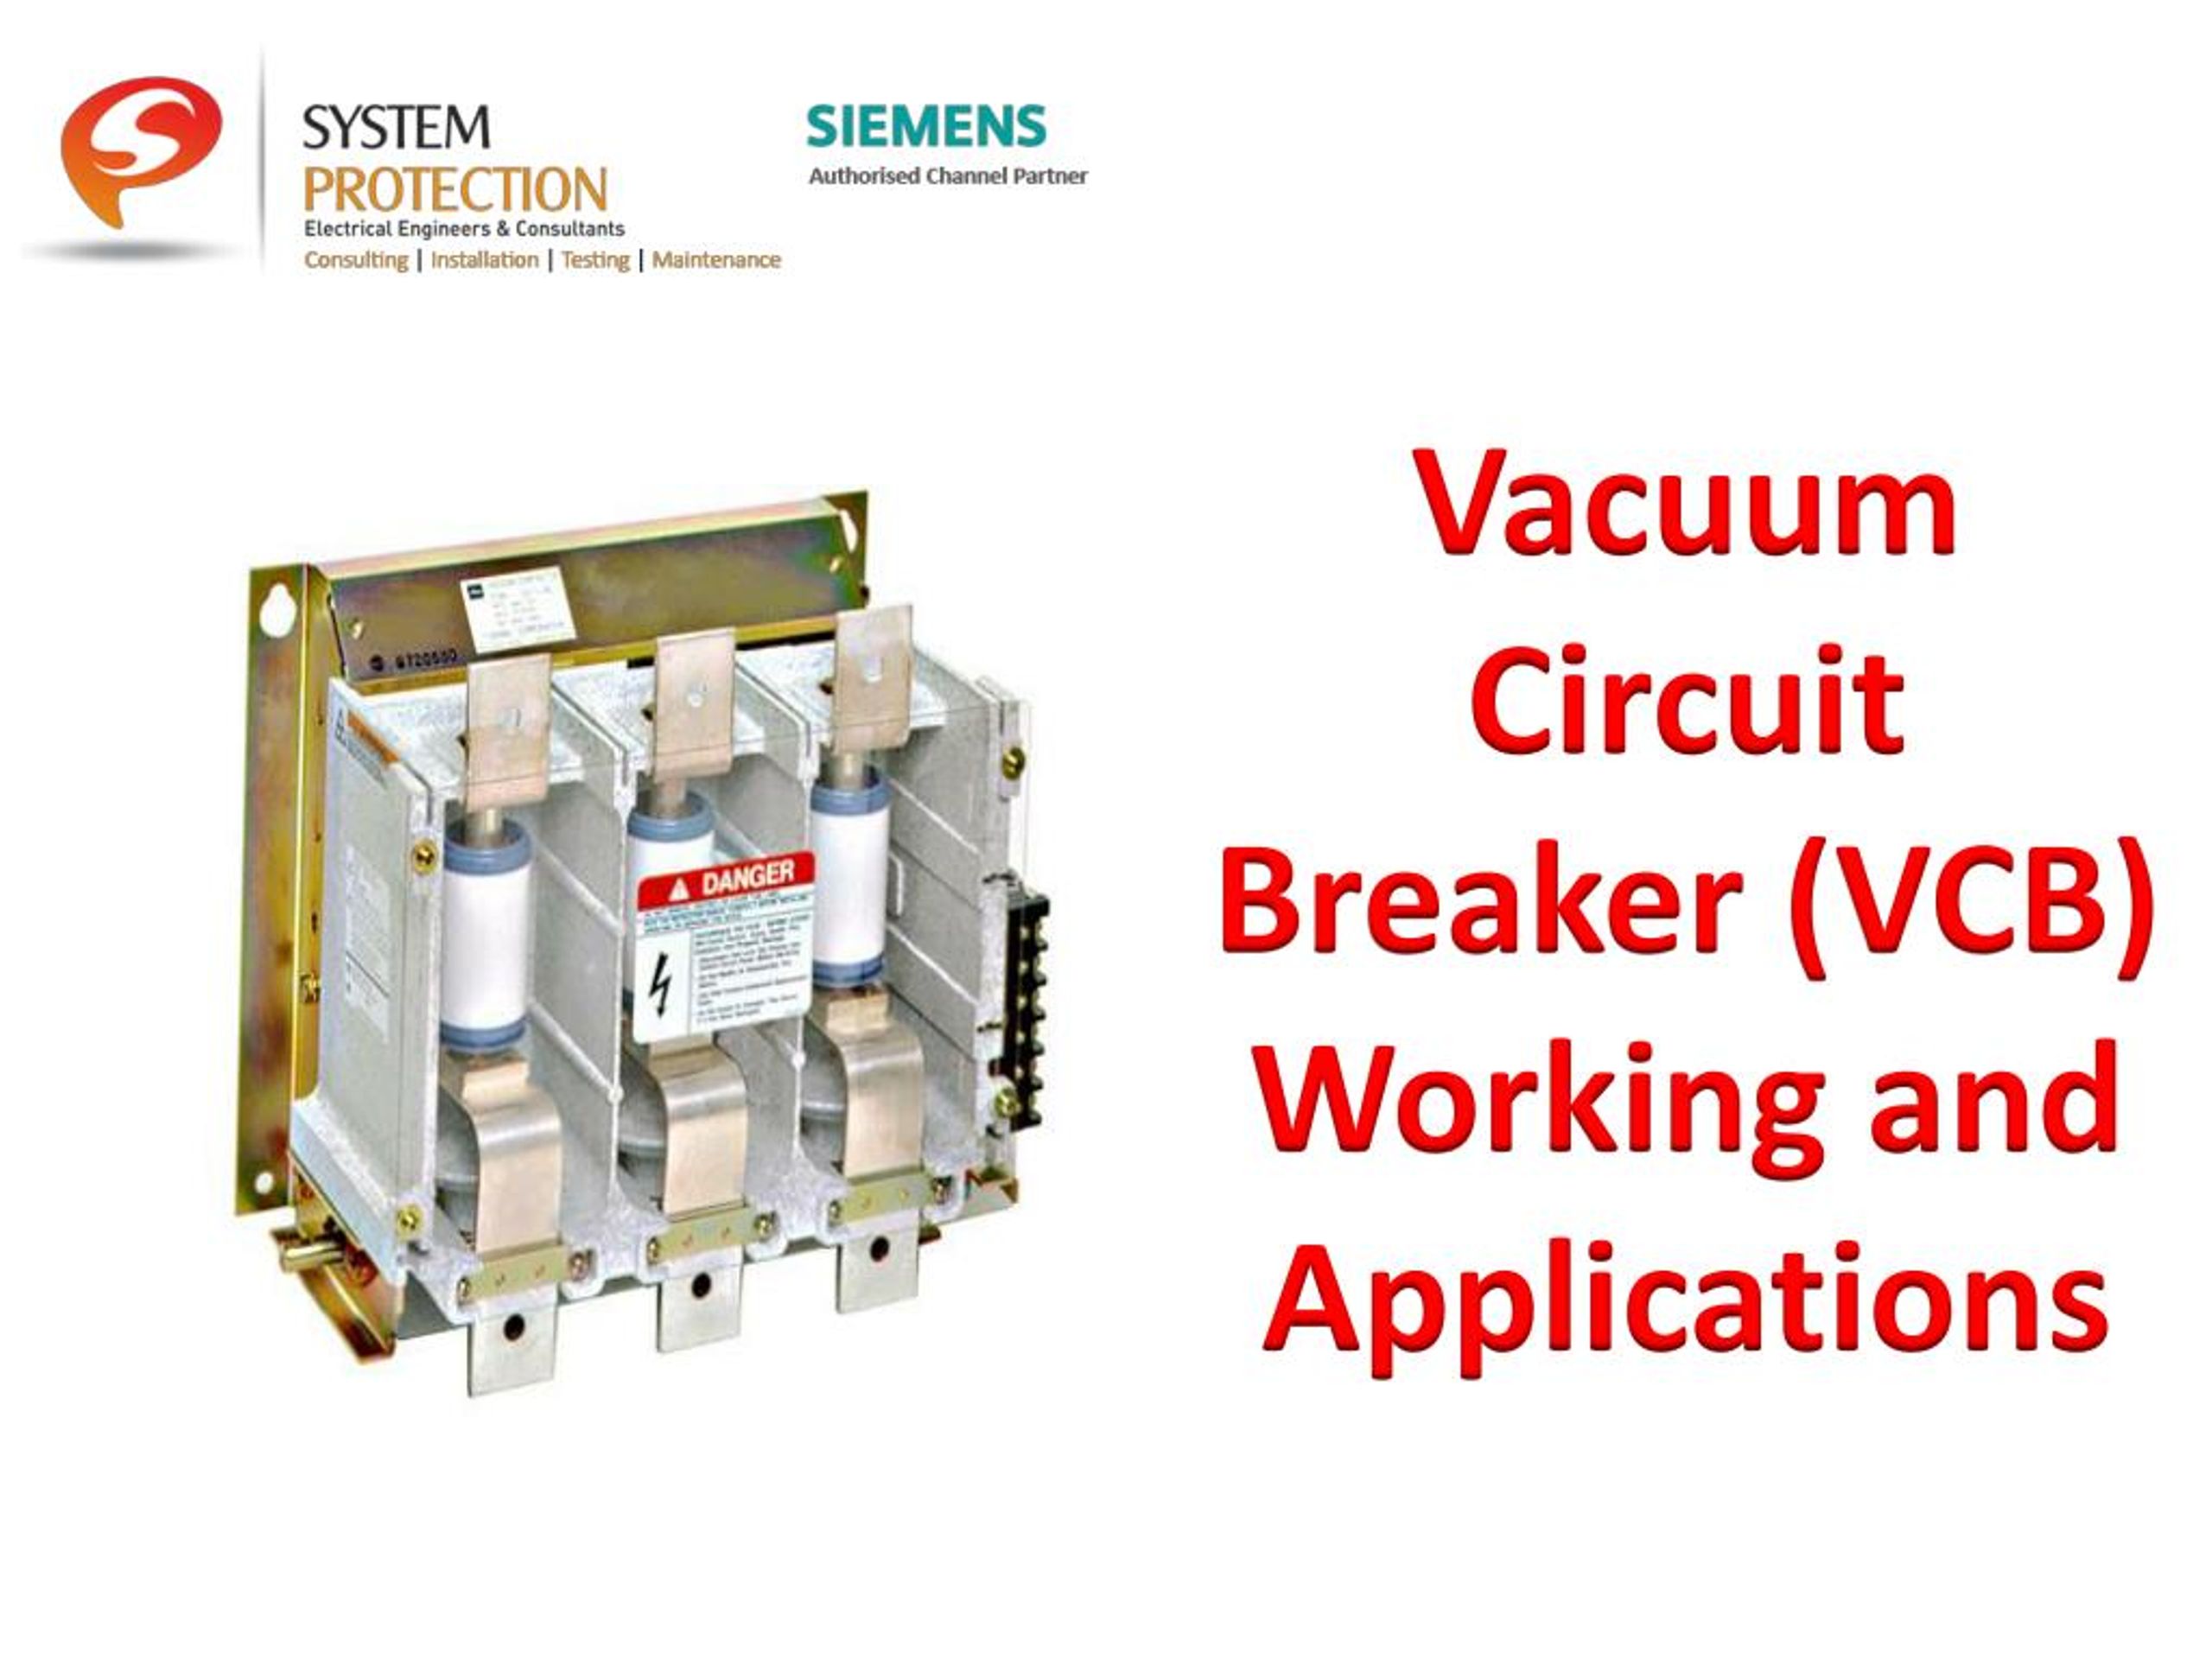 PPT - Vacuum Circuit Breaker (VCB) Working and Applications | Uses Of VCB  PowerPoint Presentation - ID:7689524